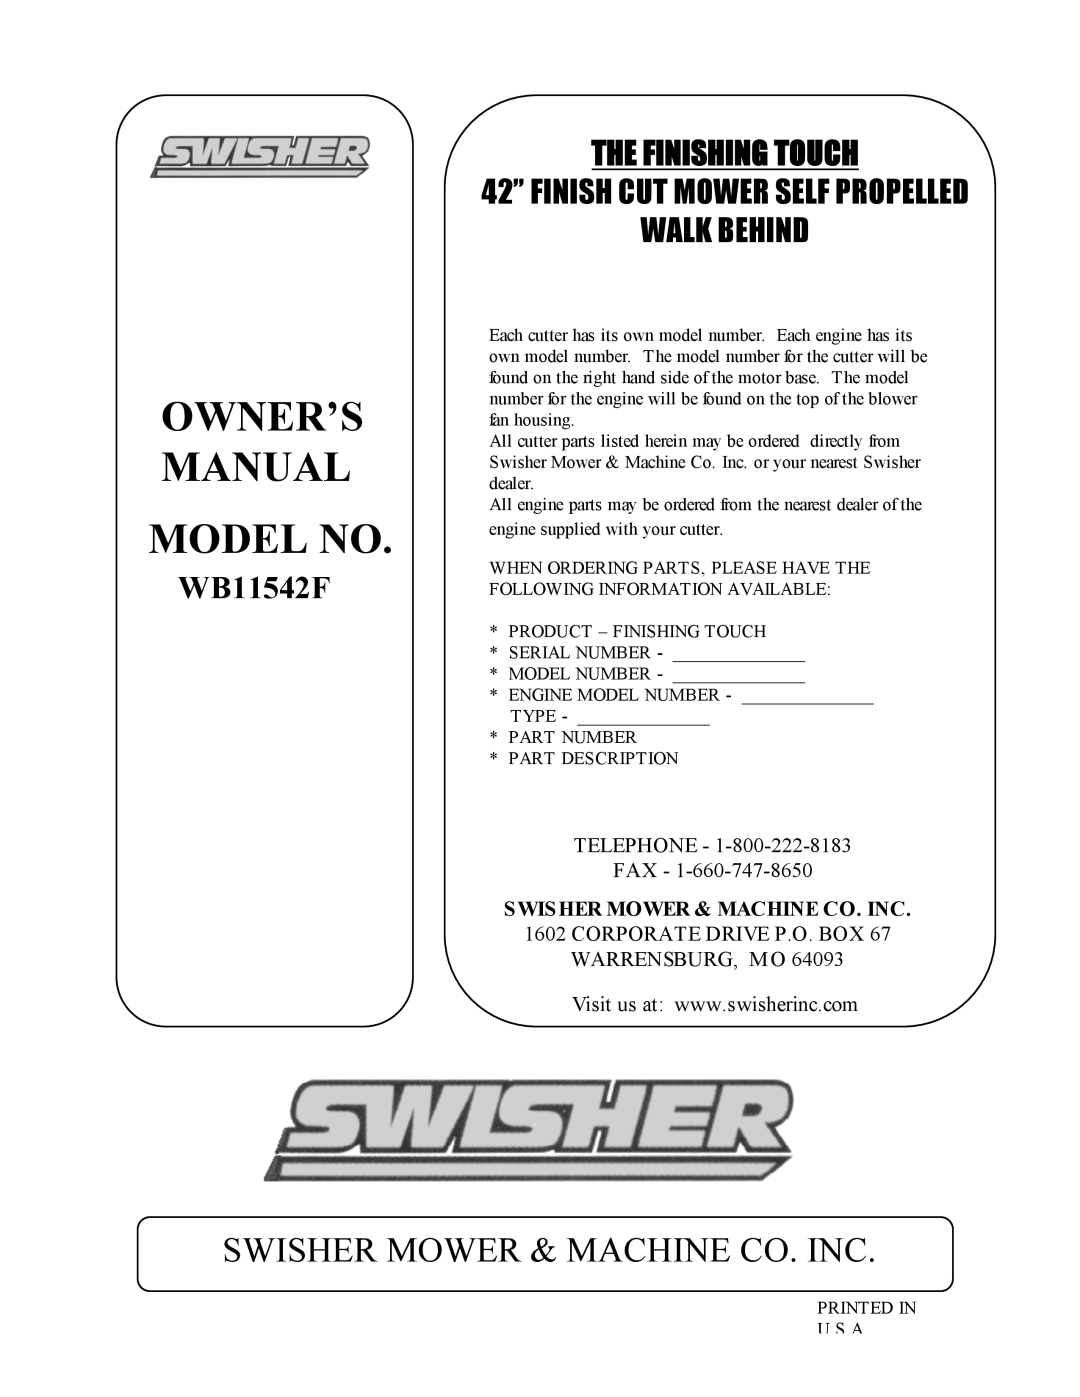 Swisher WB11542F owner manual Telephone - Fax, Swisher Mower & Machine Co. Inc, The Finishing Touch 